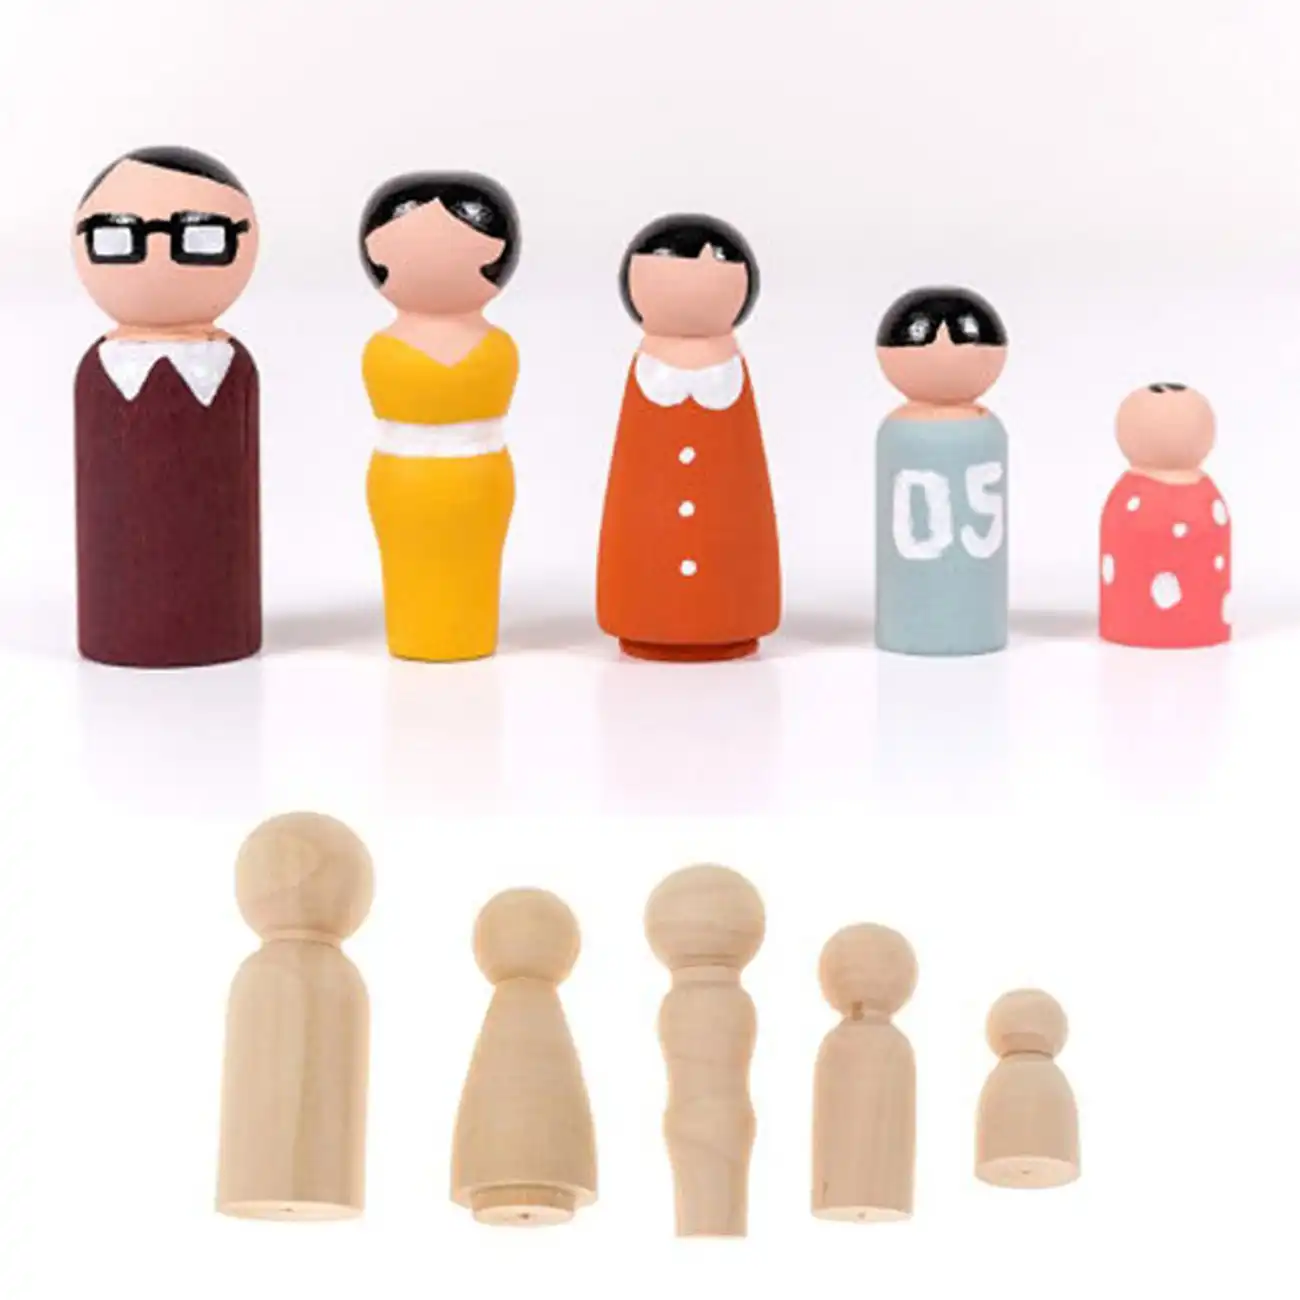 Unfinished Wooden Peg Dolls 52Pcs 35mm 43mm 55mm 65mm Tiny Wooden Doll Bodies Wooden Peg Doll Family Natural Wooden Doll People for Kids Hand Made DIY Creative Crafts